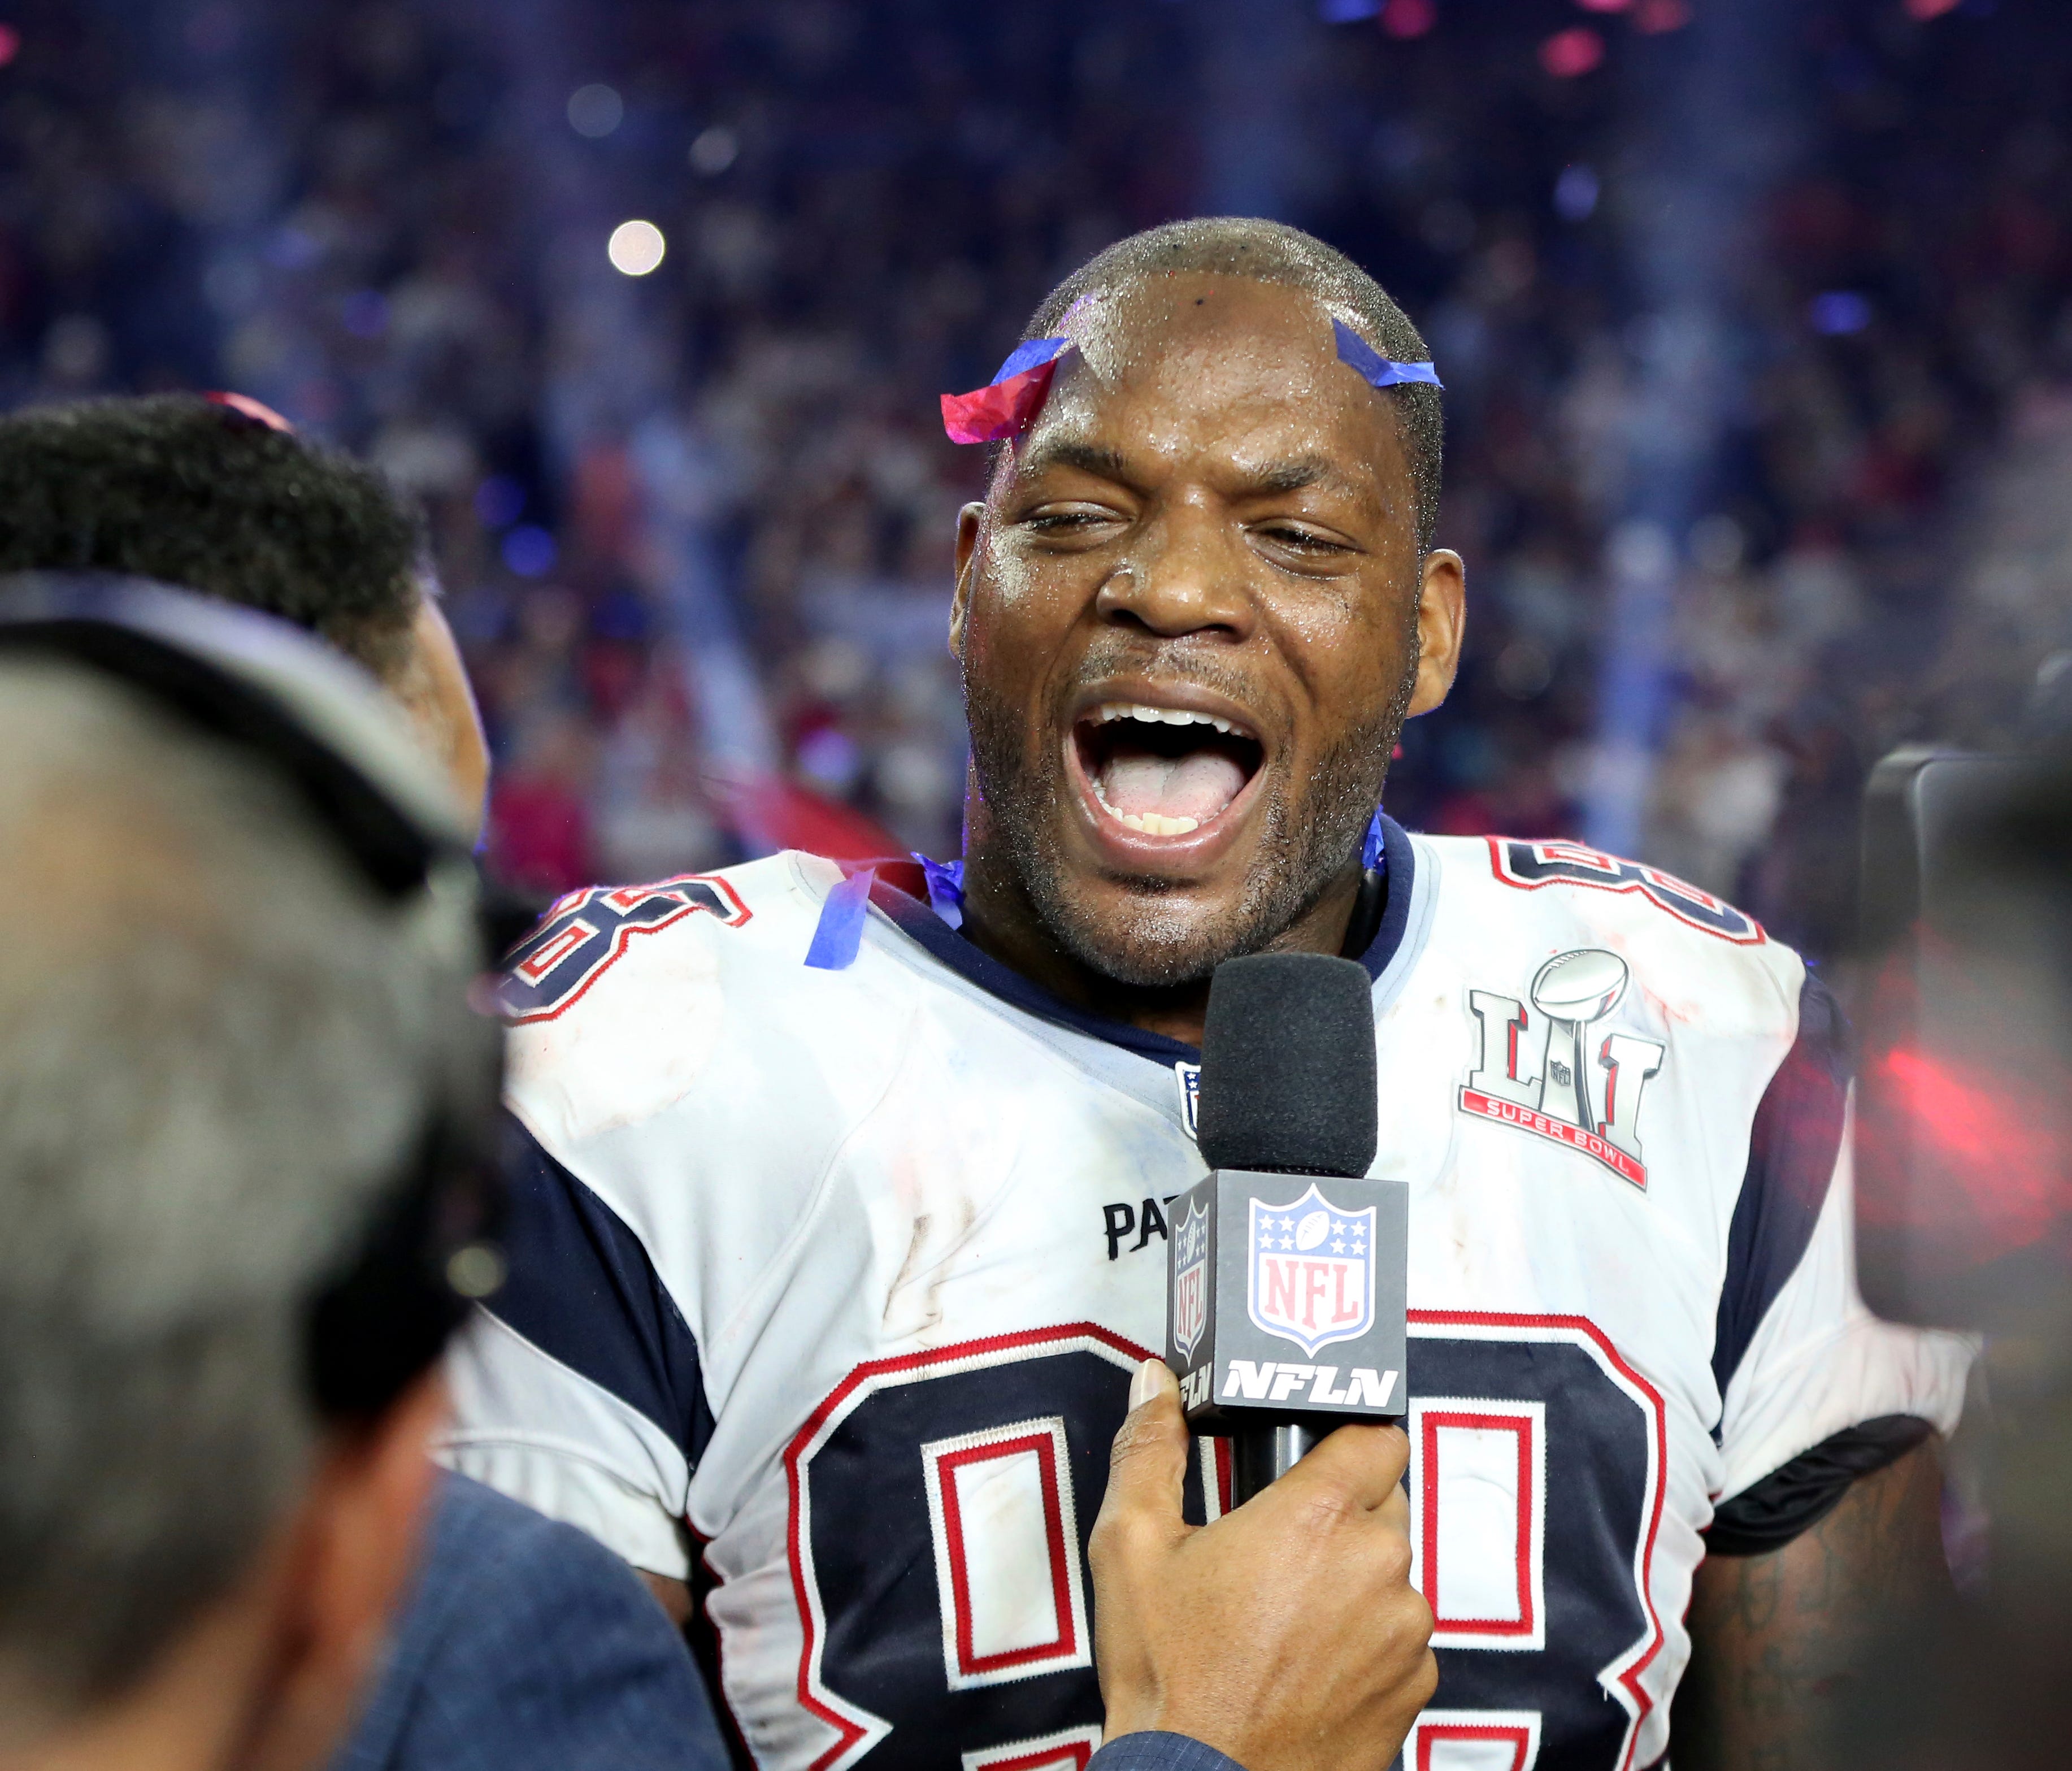 Martellus Bennett is interviewed on the field after a win against the Atlanta Falcons at Super Bowl 51 on Sunday, February 5, 2017 in Houston, TX.